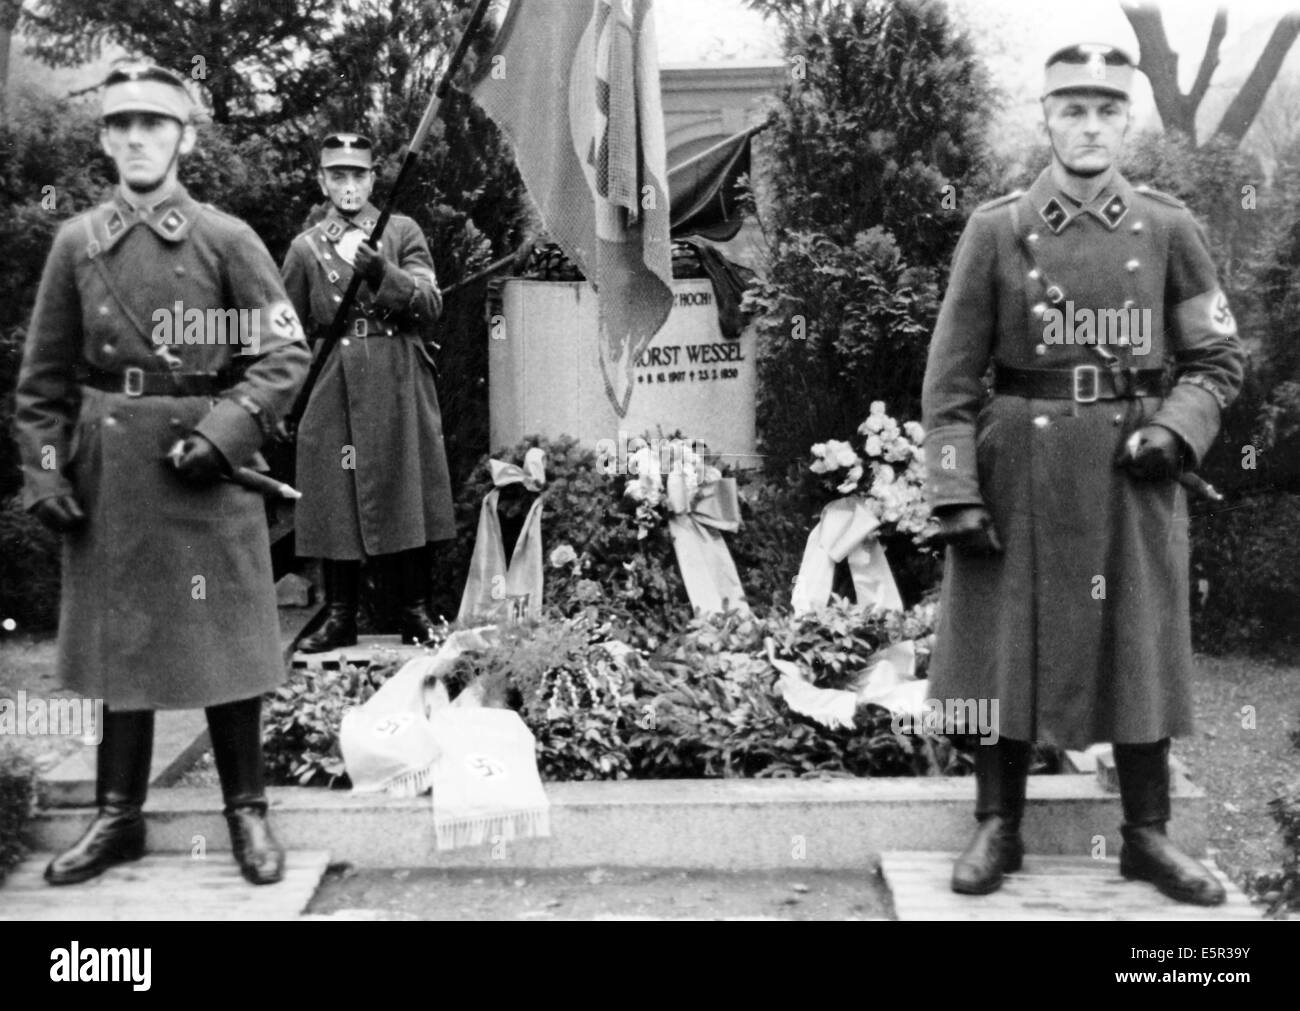 The Nazi propaganda photo shows the guard of honor at the grave of Horst Wessel at St. Nicholas Cemetery during a commemoration ceremony for the people killed in the Hitler Ludendorff Coup (Beer Hall Putsch) in 1923 in Berlin, Germany, November 1943. Fotoarchiv für Zeitgeschichte - NO WIRE SERVICE Stock Photo